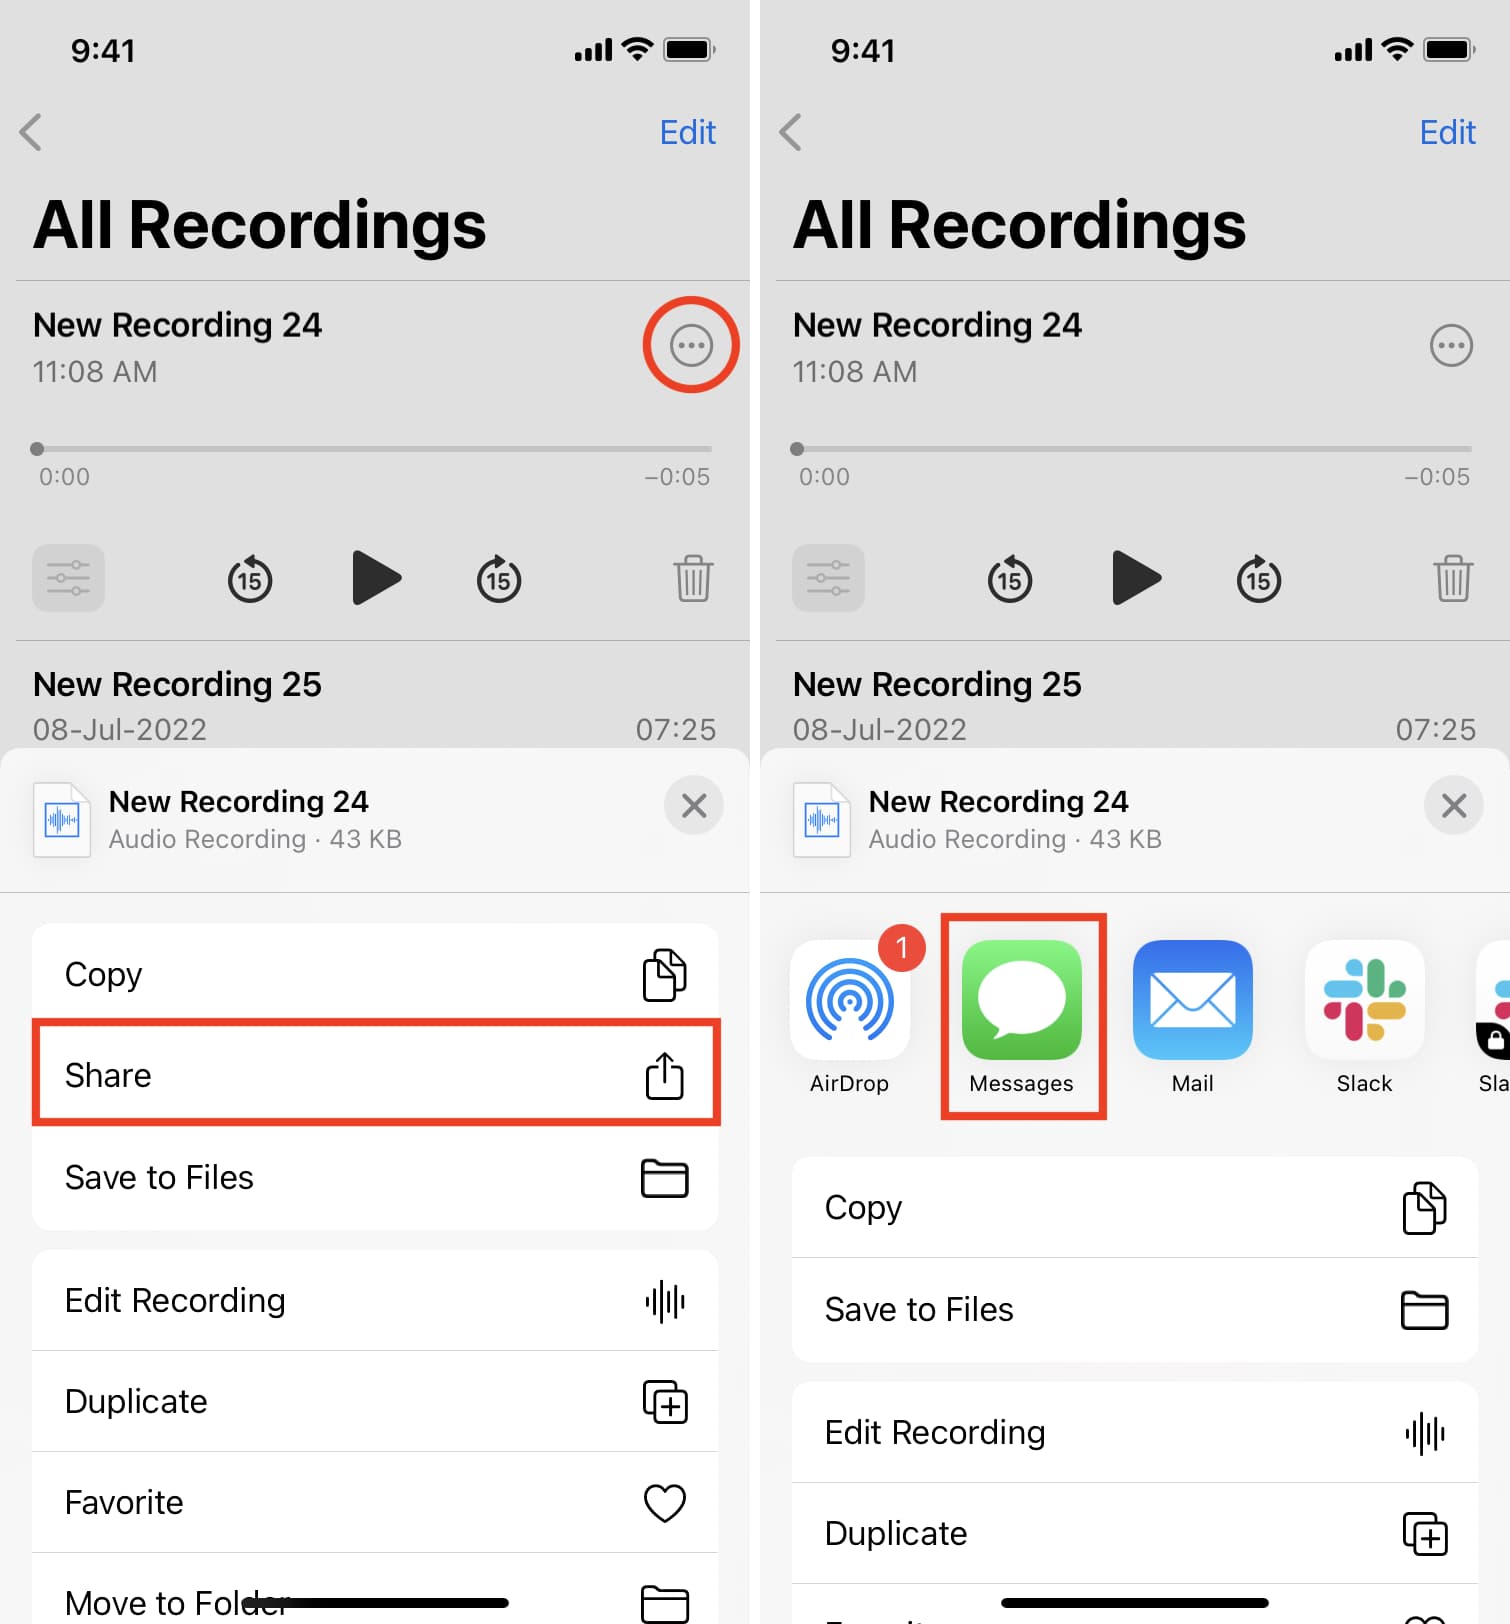 voice-messaging-a-guide-to-sending-voice-messages-on-iphone-11